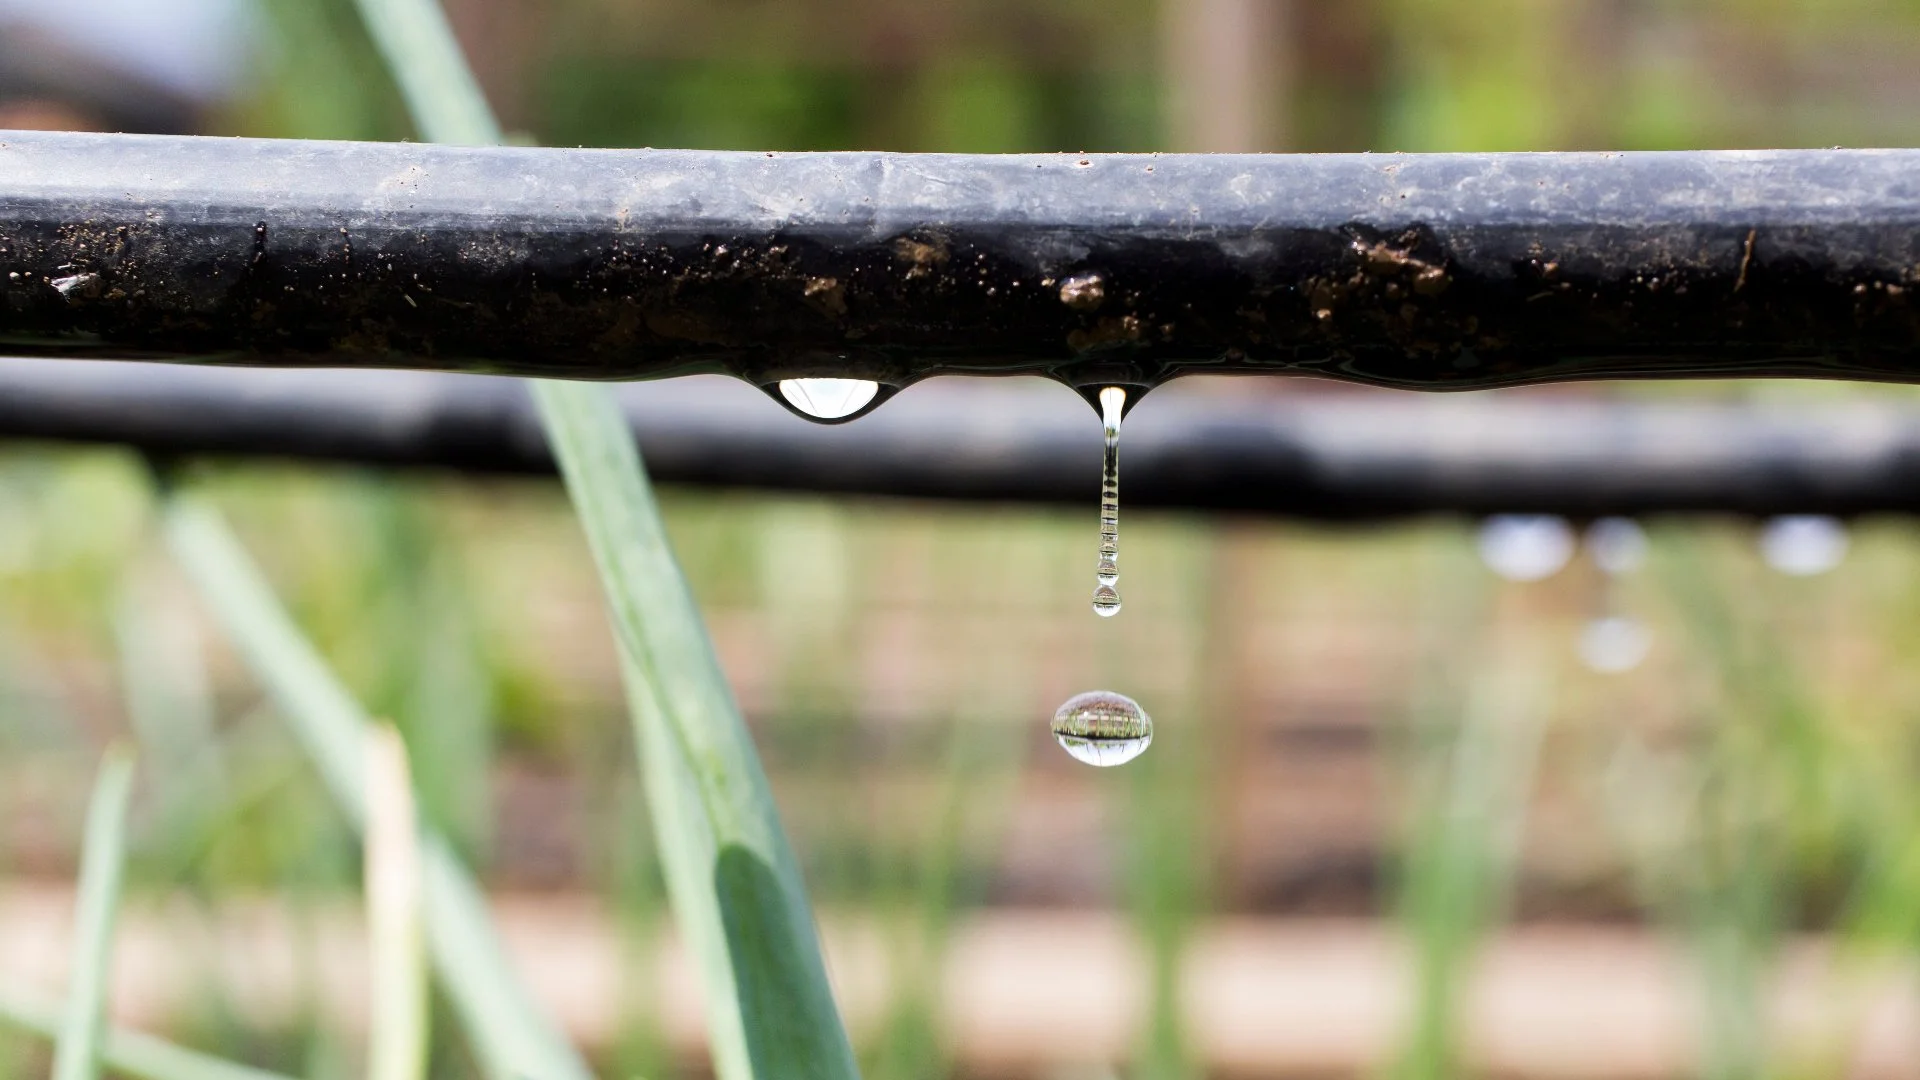 Should I Install a Drip Irrigation System on My Property?